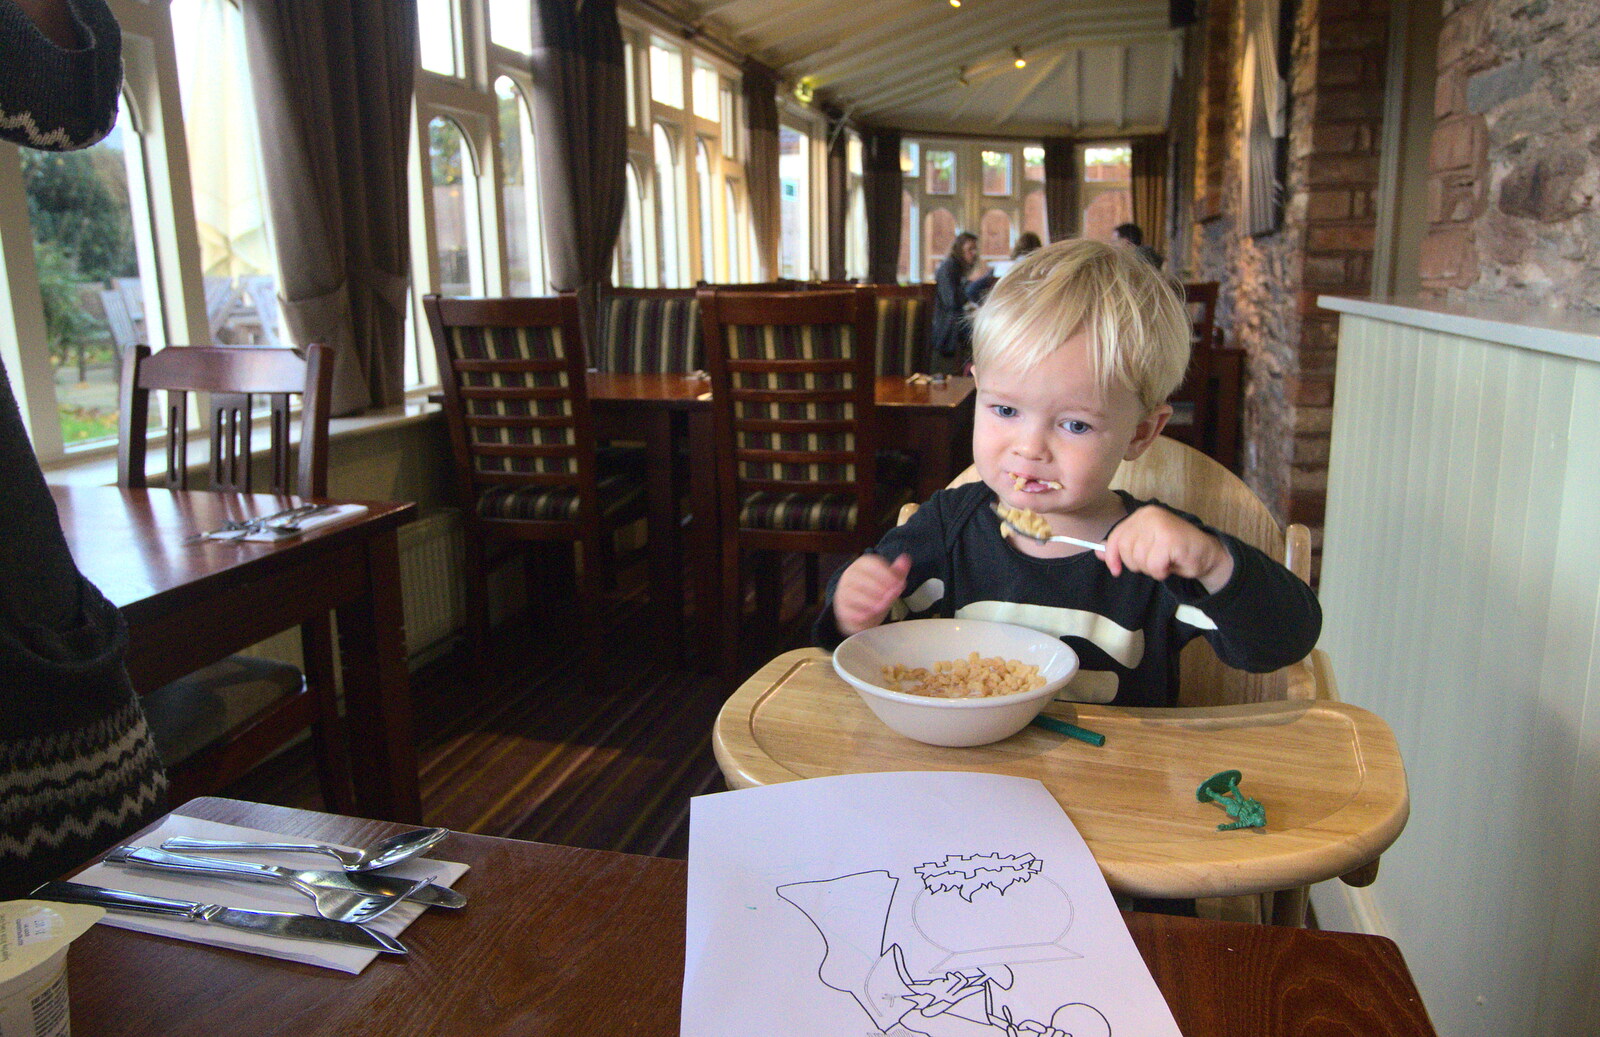 Harry stuffs his face with cereal from A Few Days in Spreyton, Devon - 26th October 2013